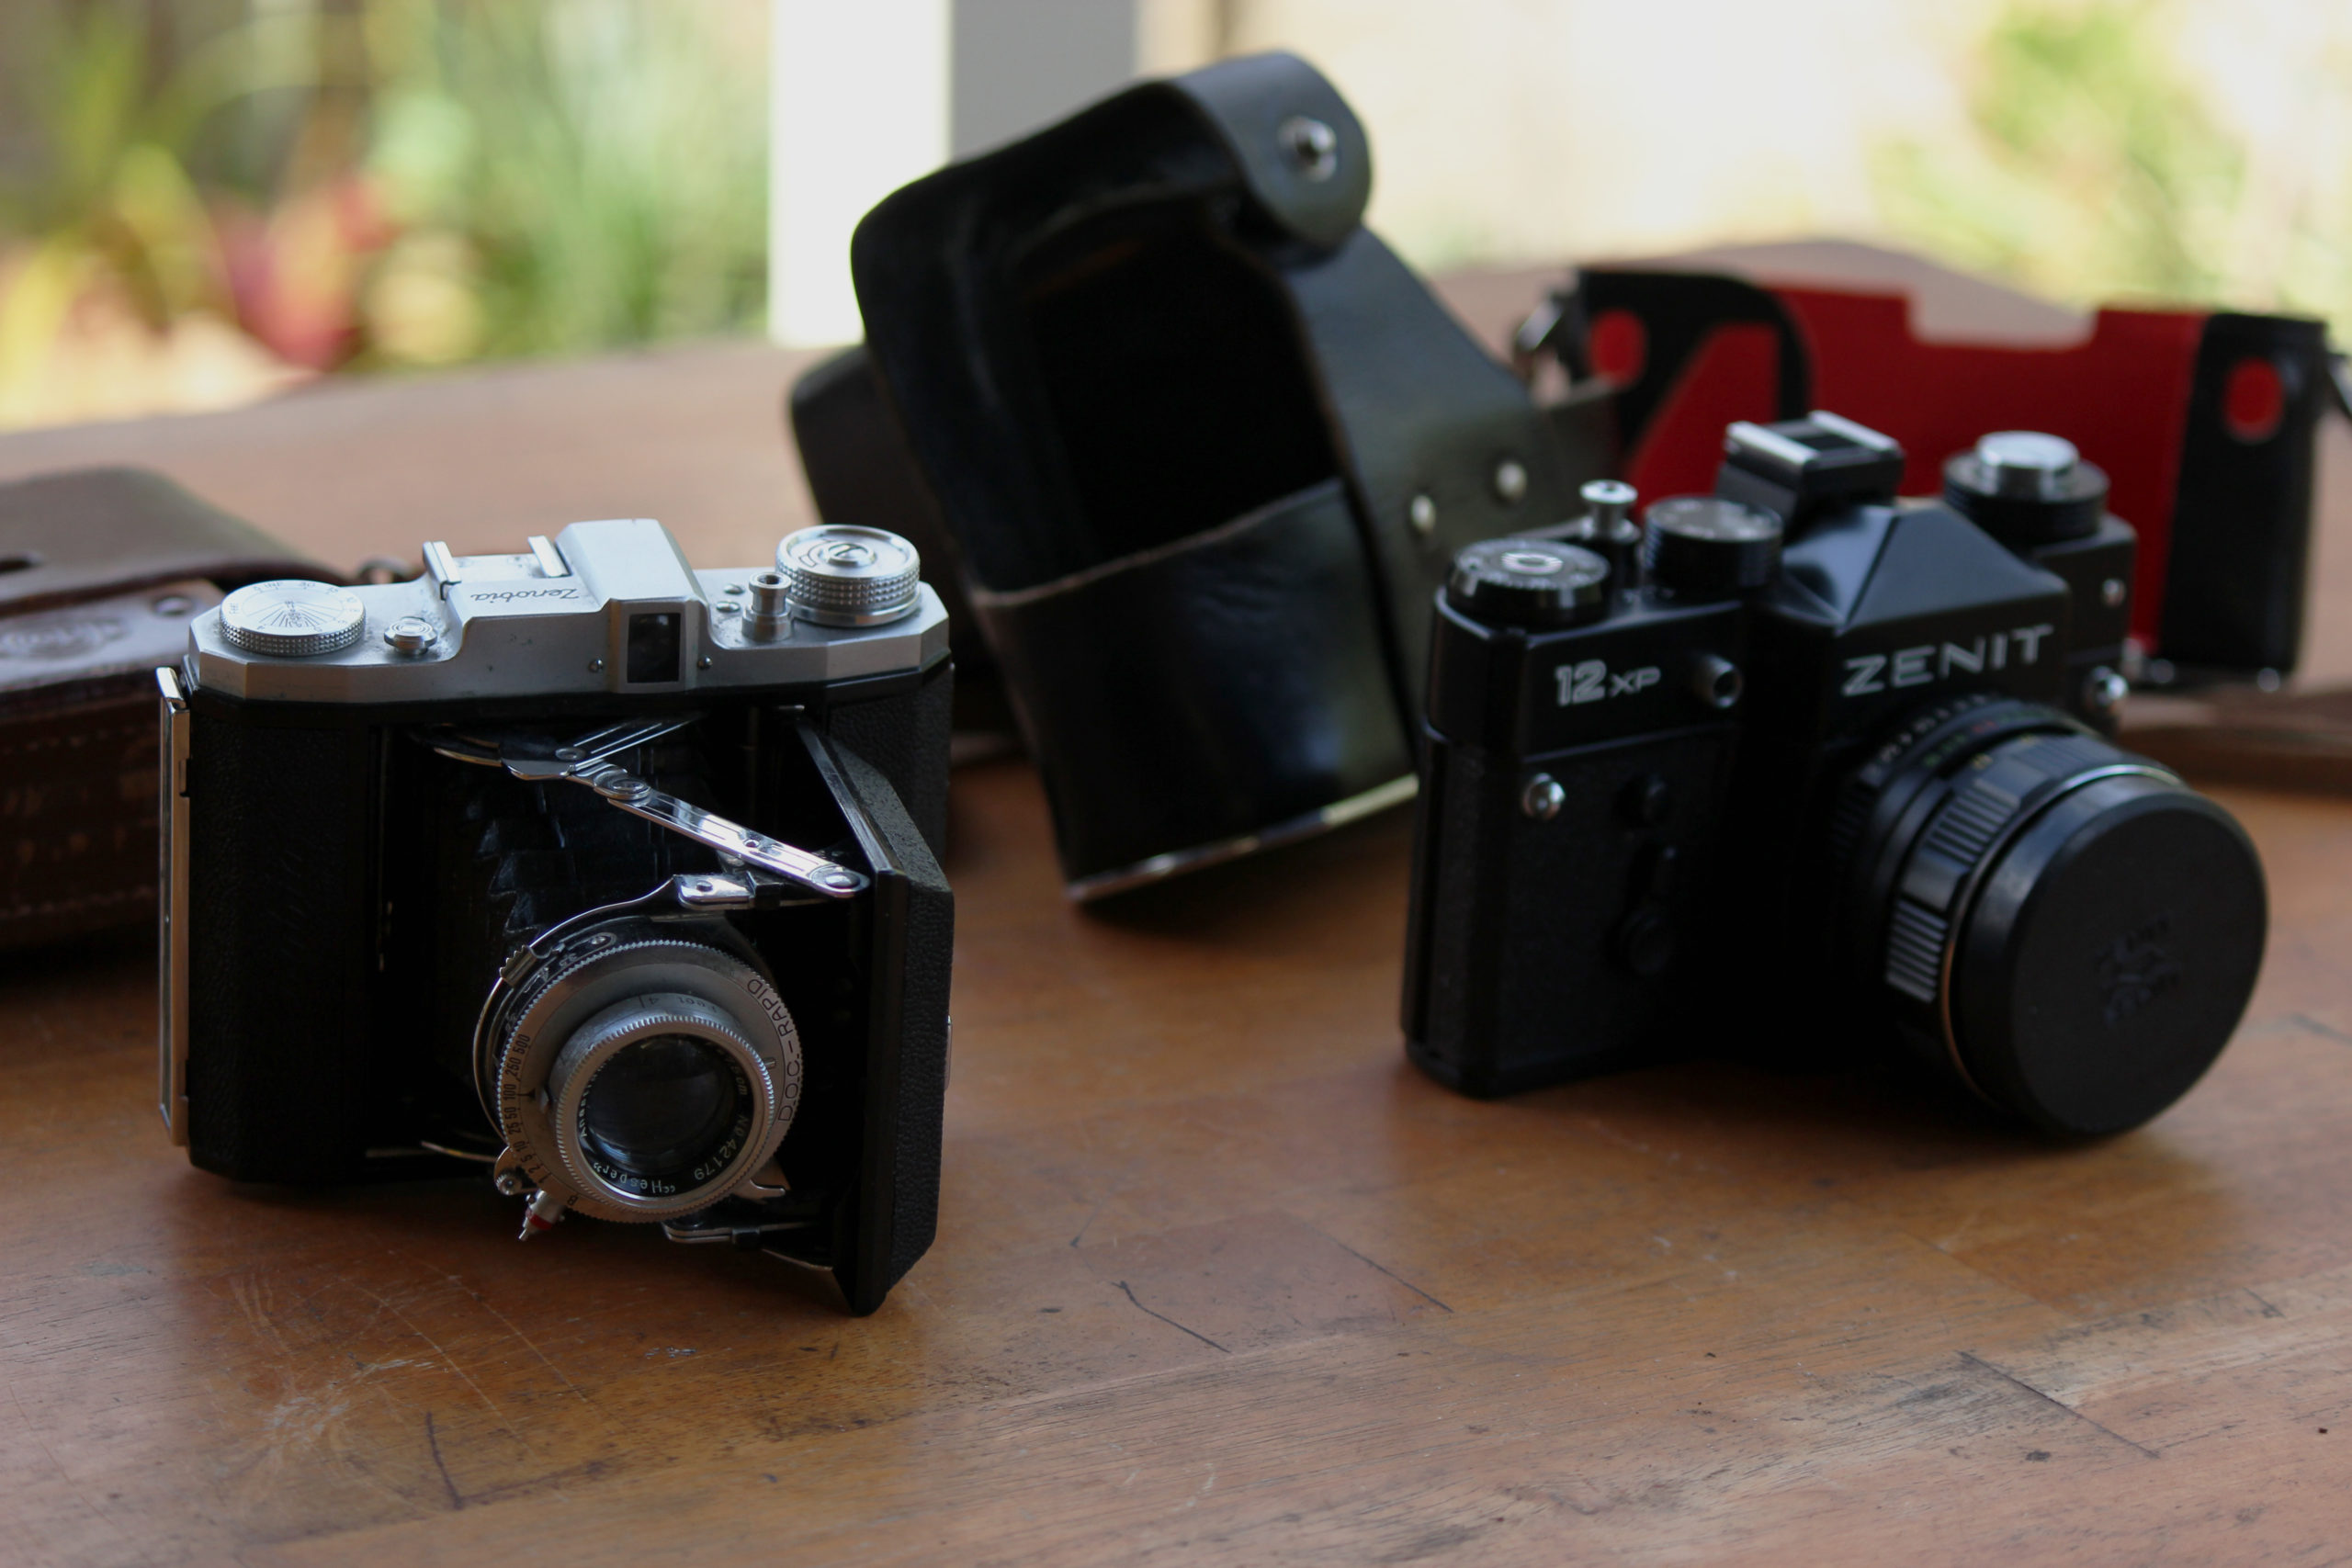 Vintage cameras on a table